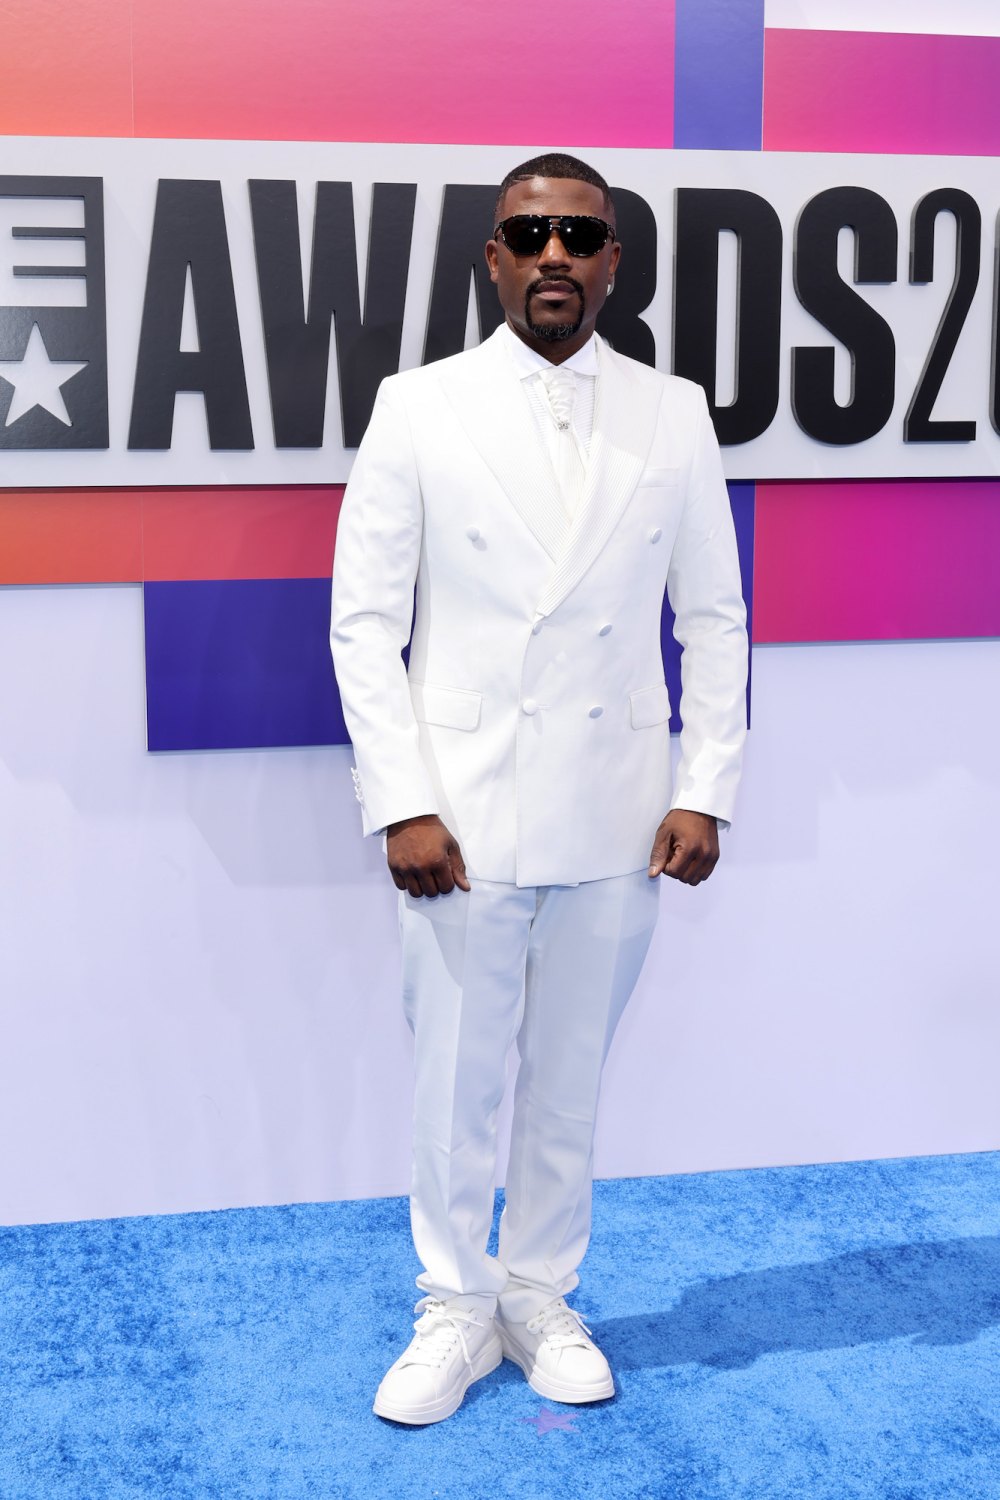 Ray J Suicidal and Locked in a False Reality After BET Awards Incident